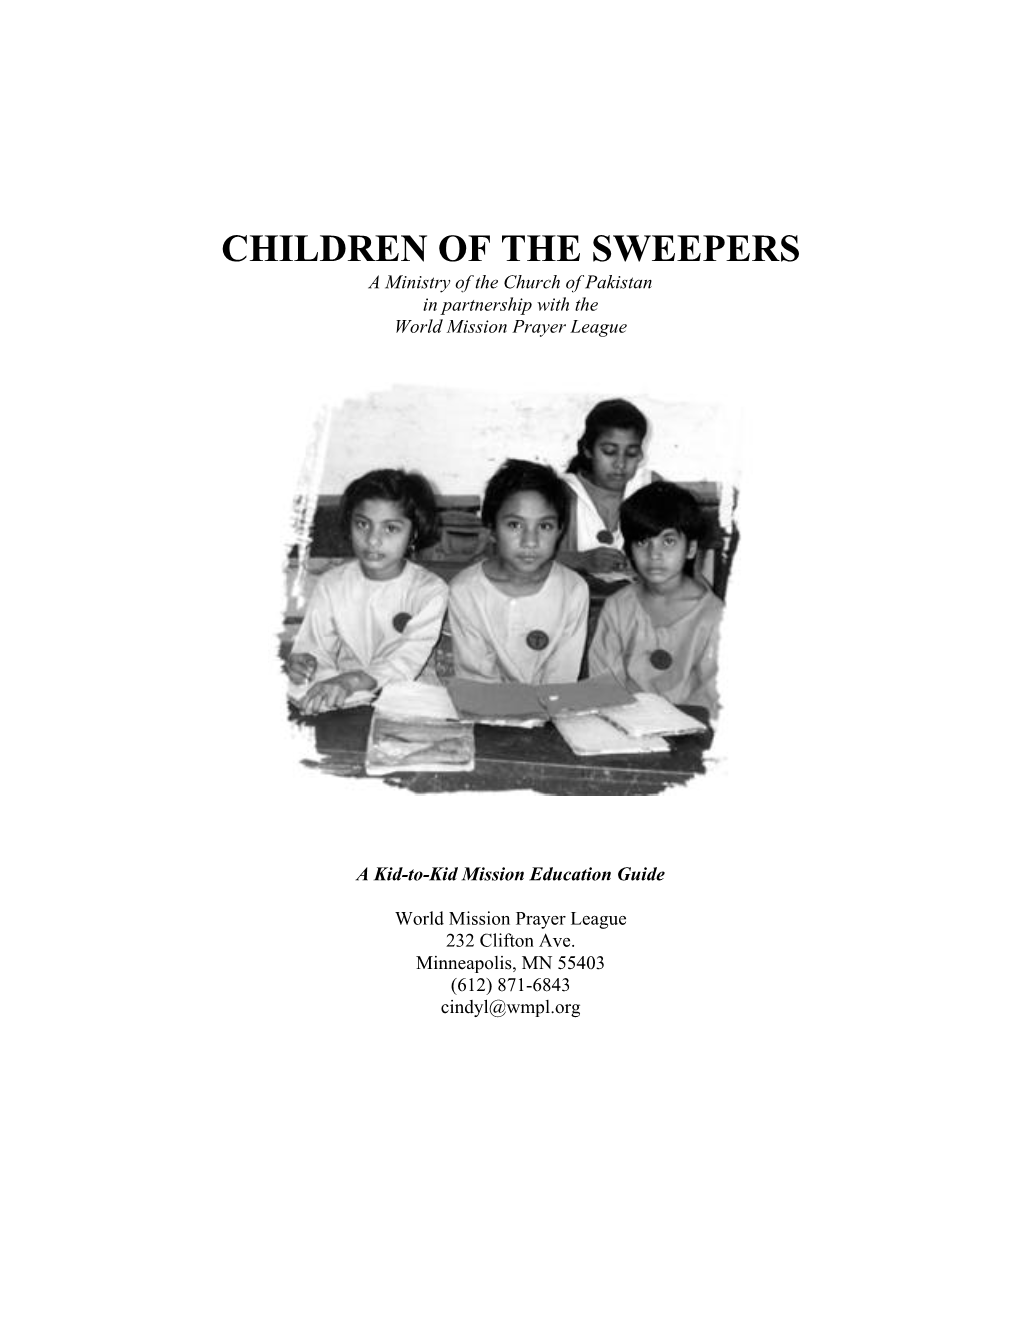 CHILDREN of the SWEEPERS a Ministry of the Church of Pakistan in Partnership with the World Mission Prayer League